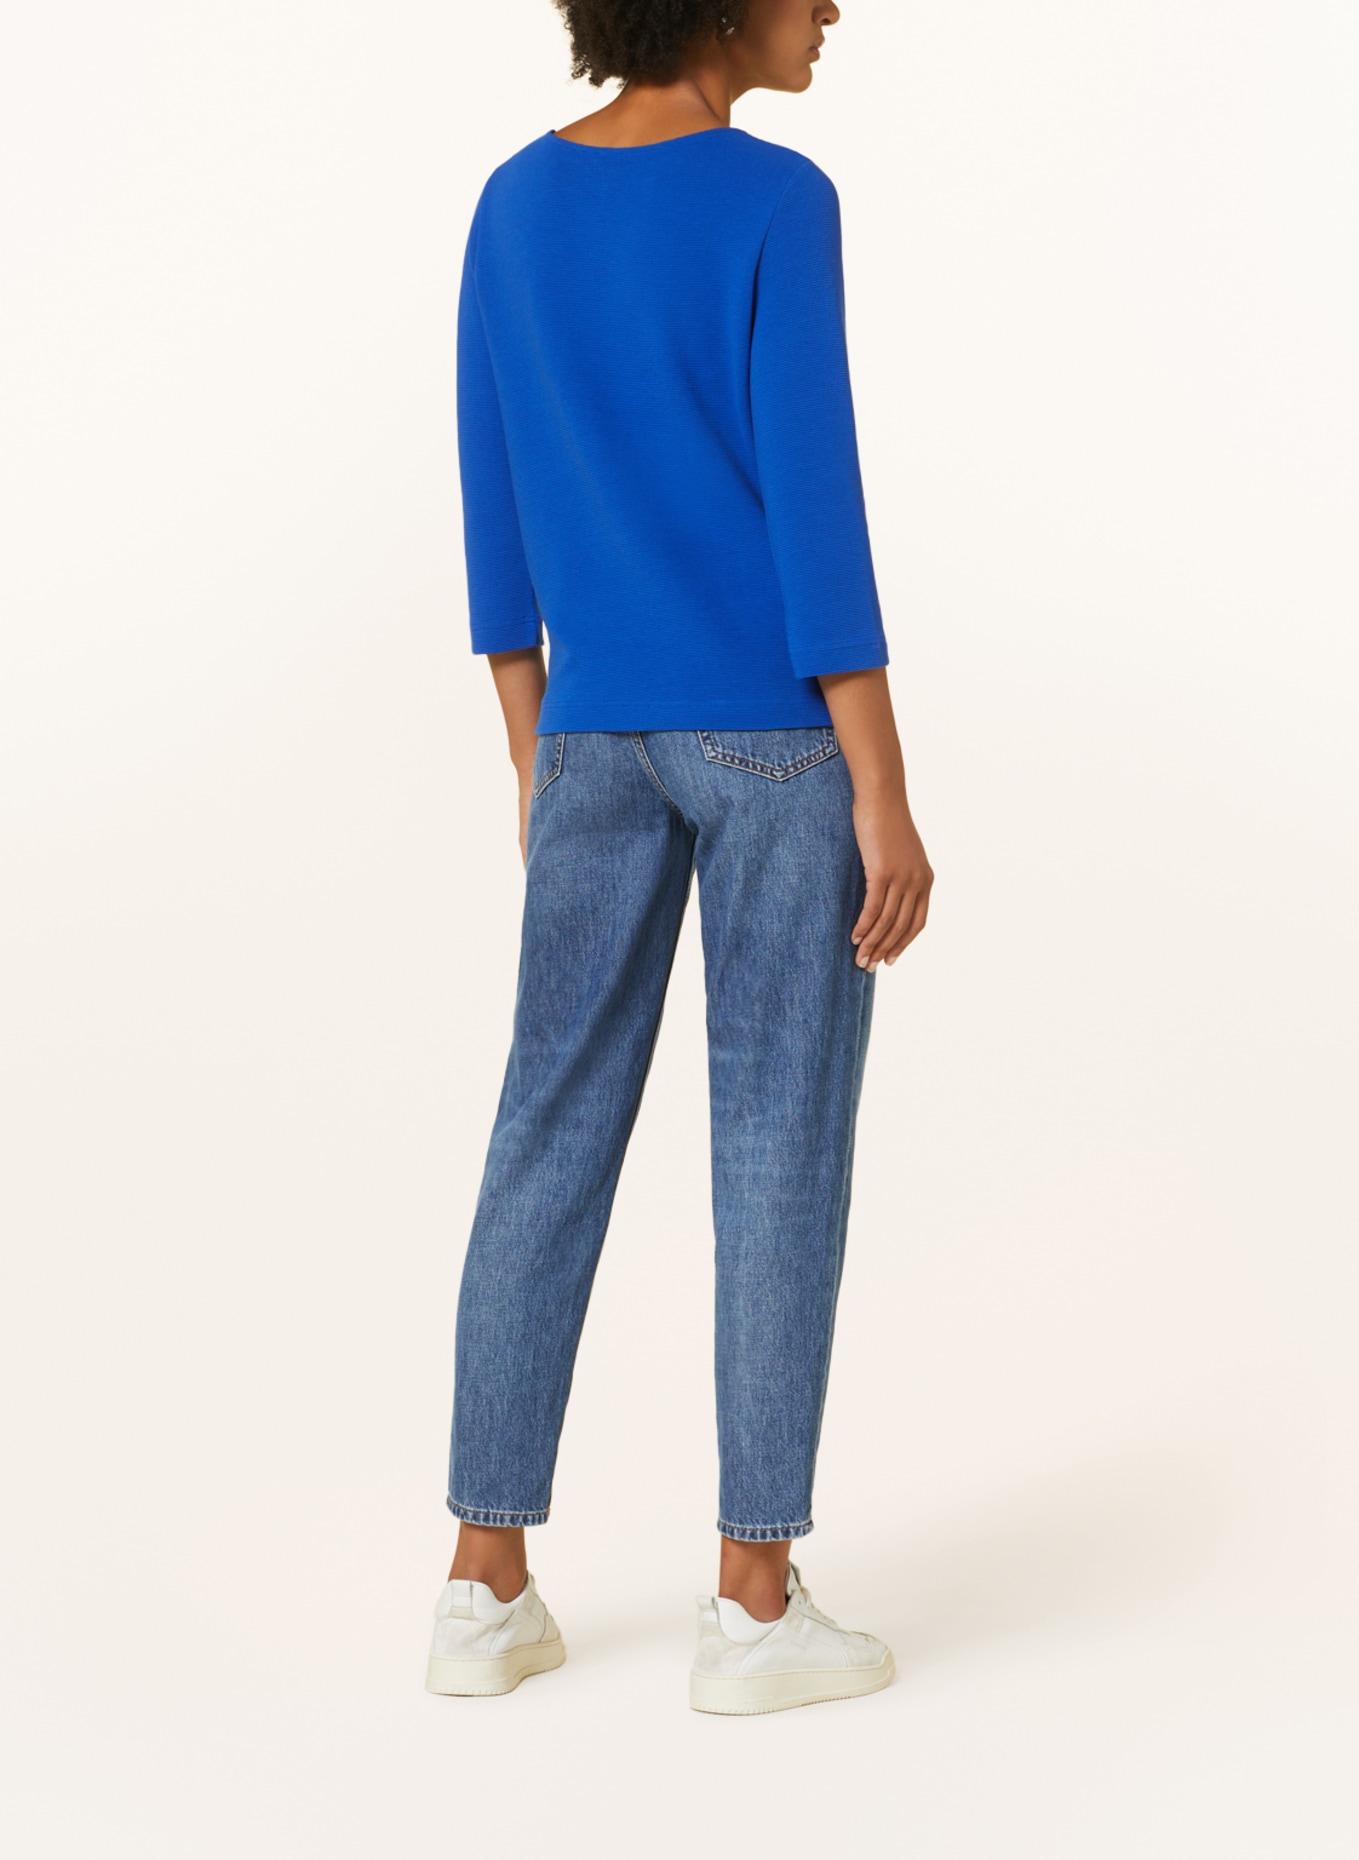 ZAÍDA Shirt with 3/4 sleeves, Color: BLUE (Image 3)